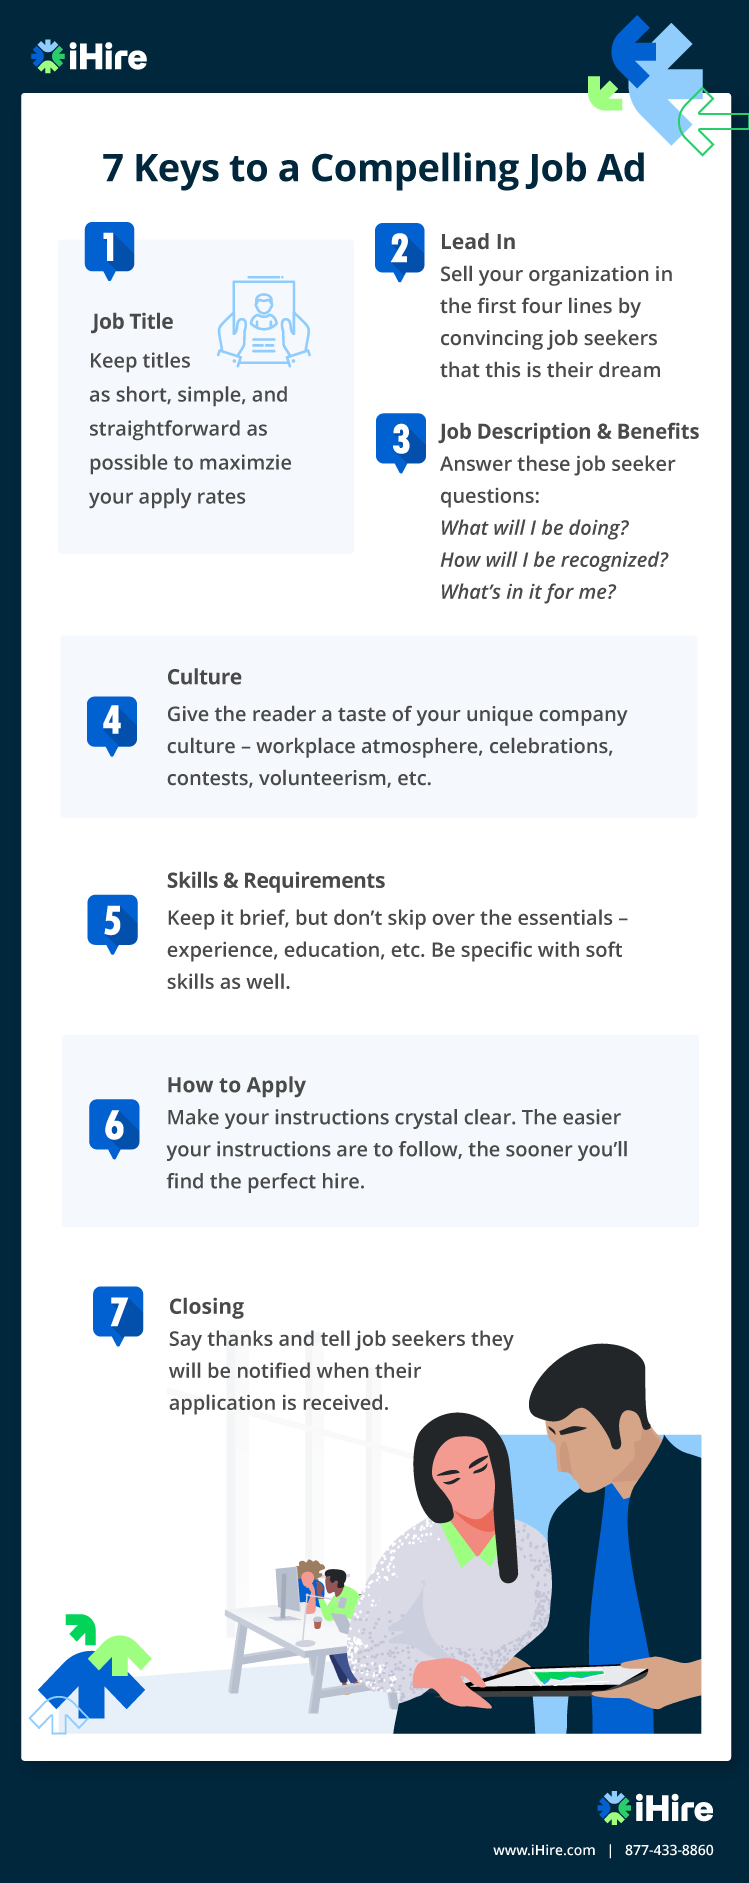 iHire 7 Keys to a Compelling Job Ad Infographic